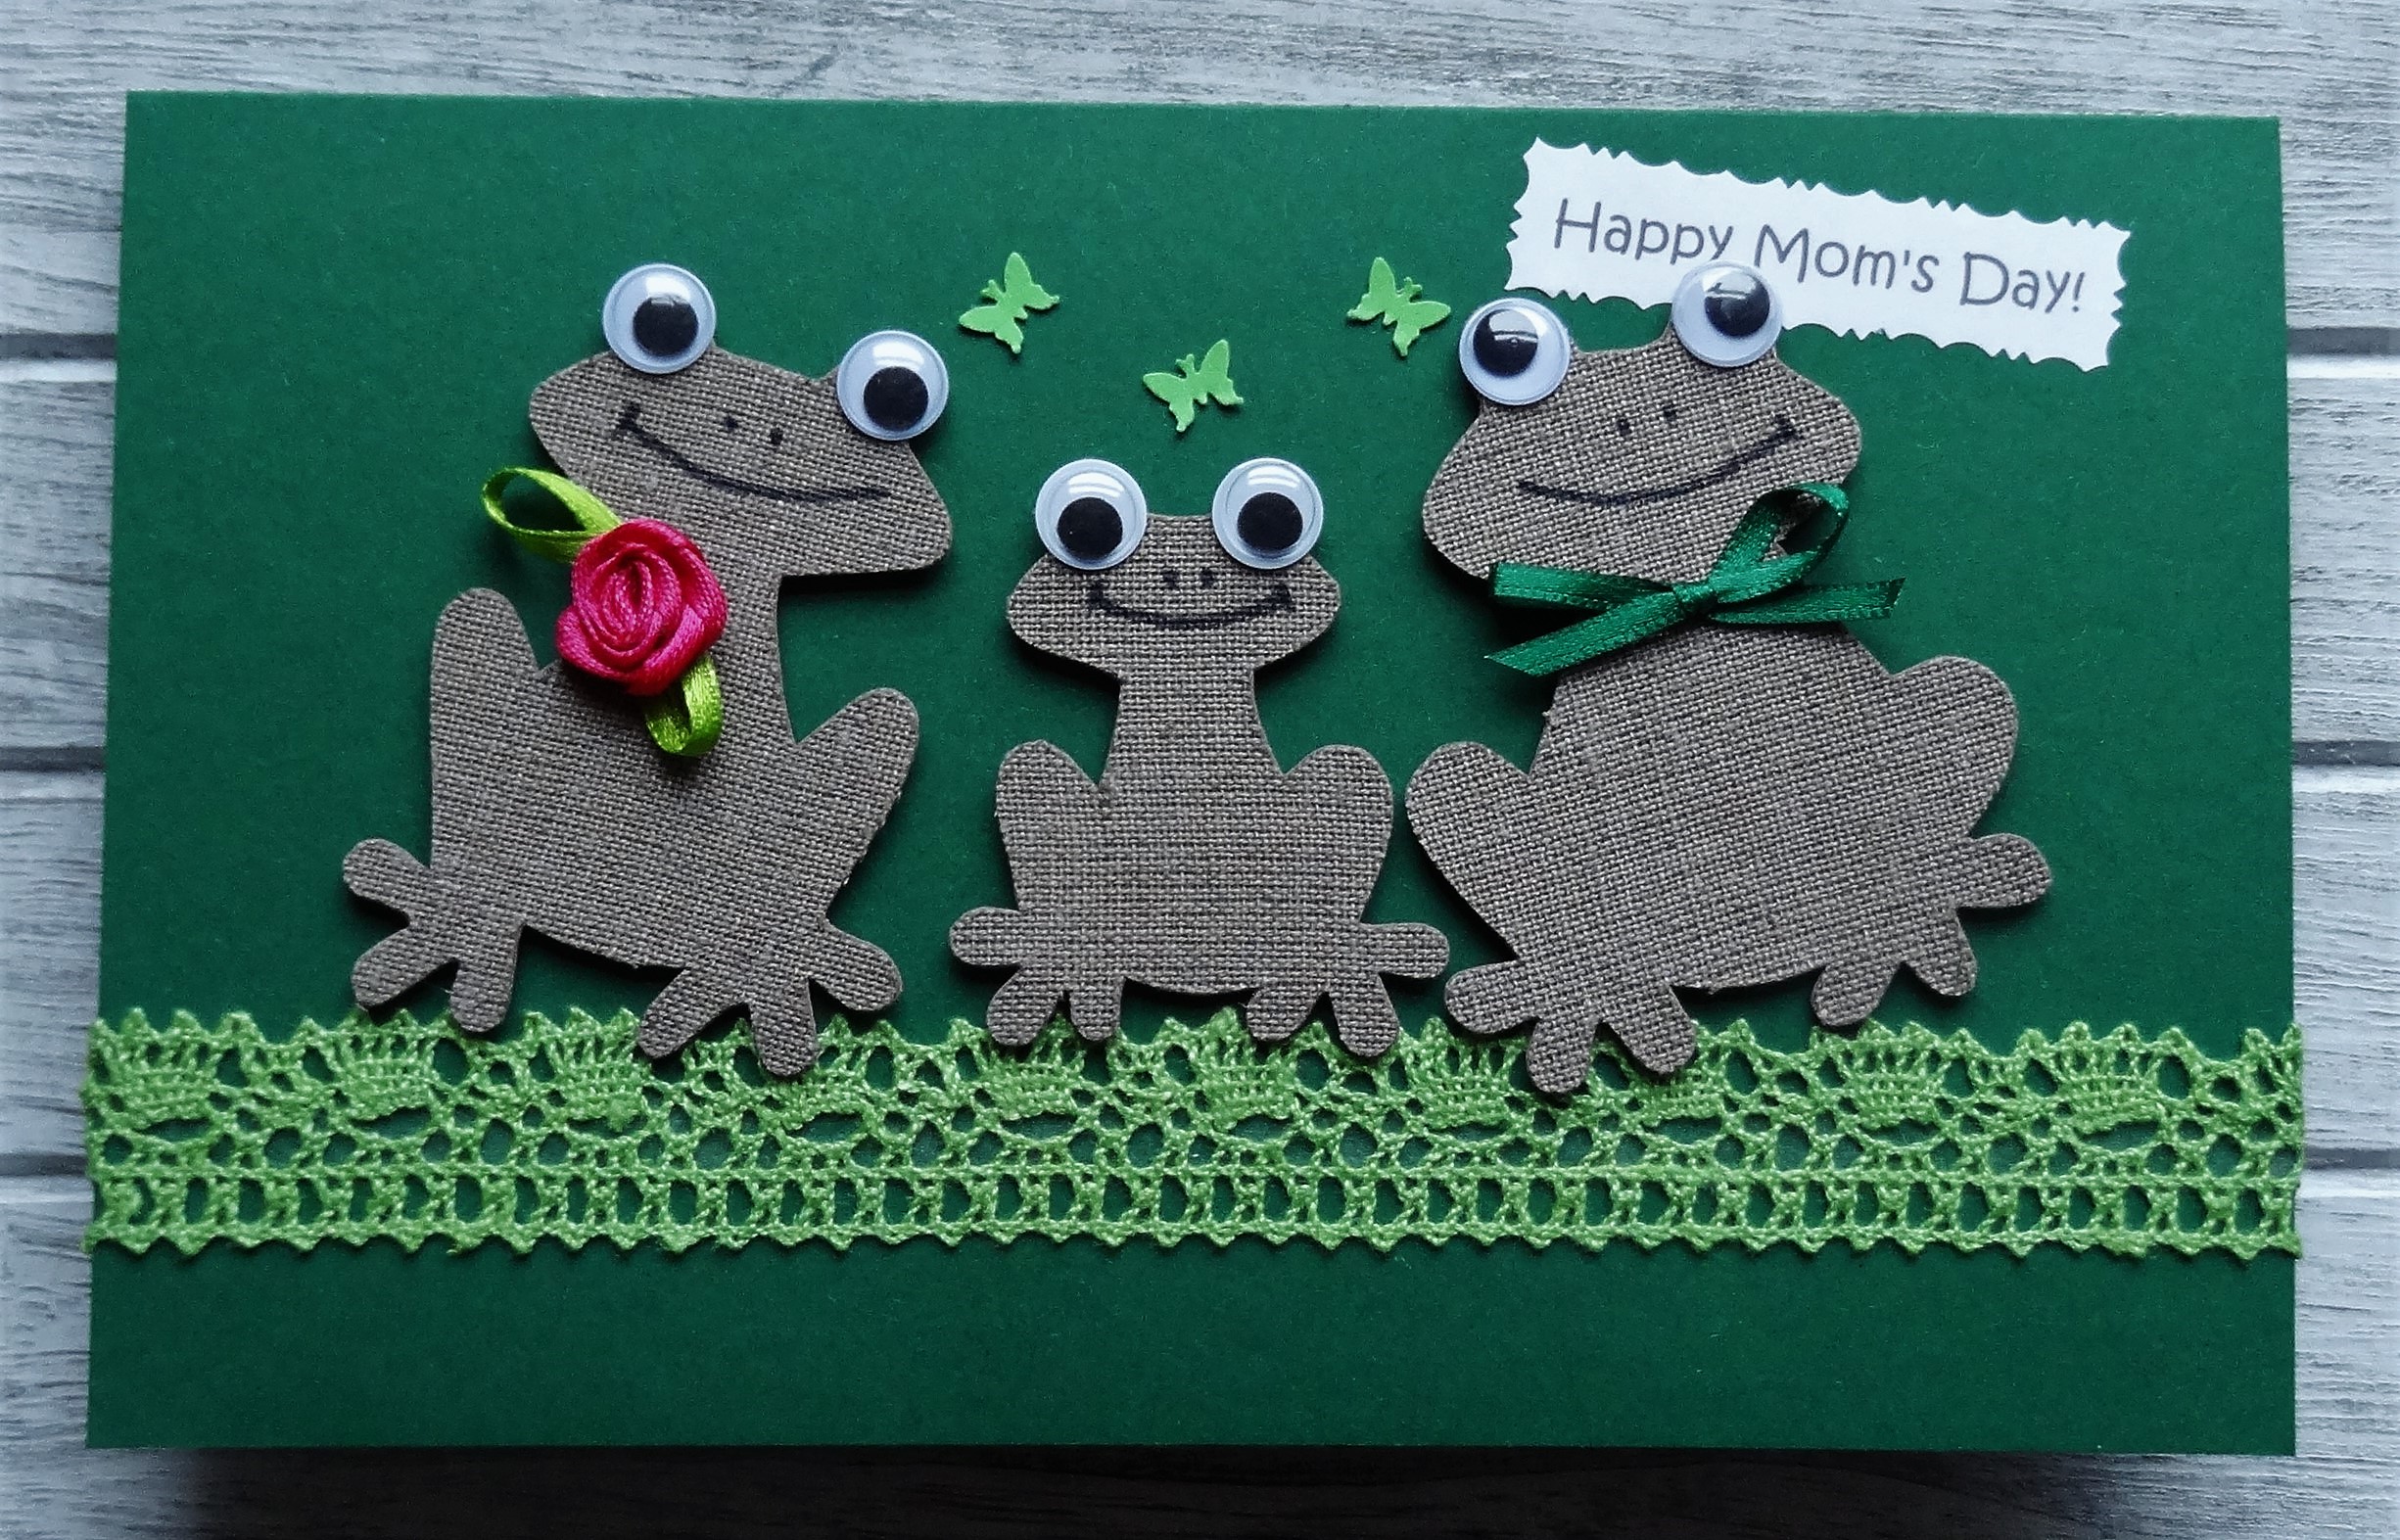 3D frogs. Happy Mom's day!